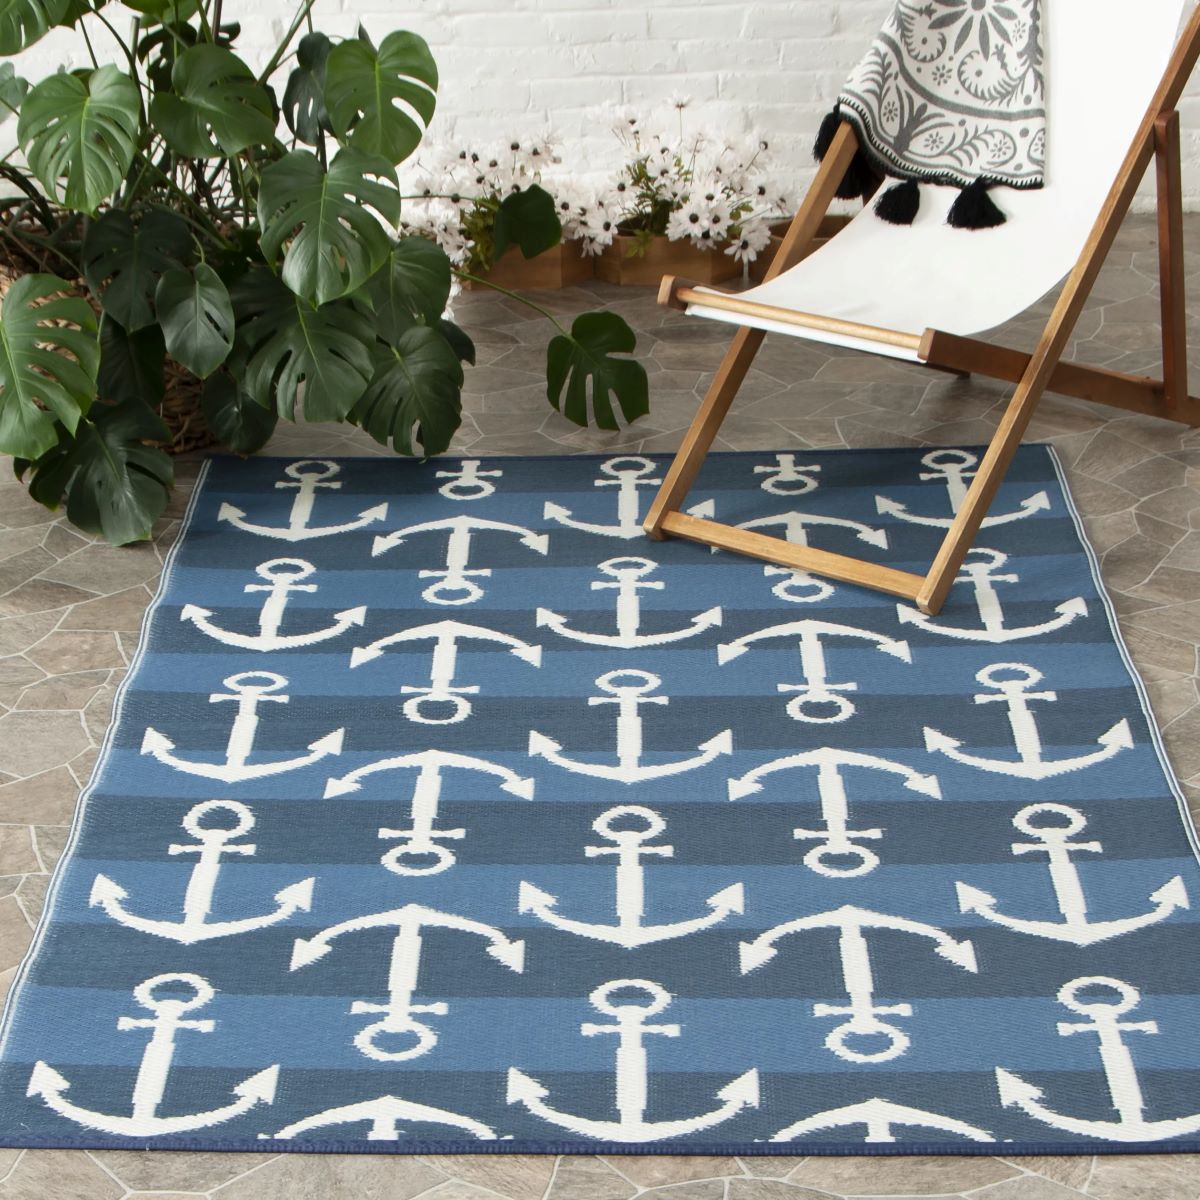 How To Build Blue Outdoor Rug